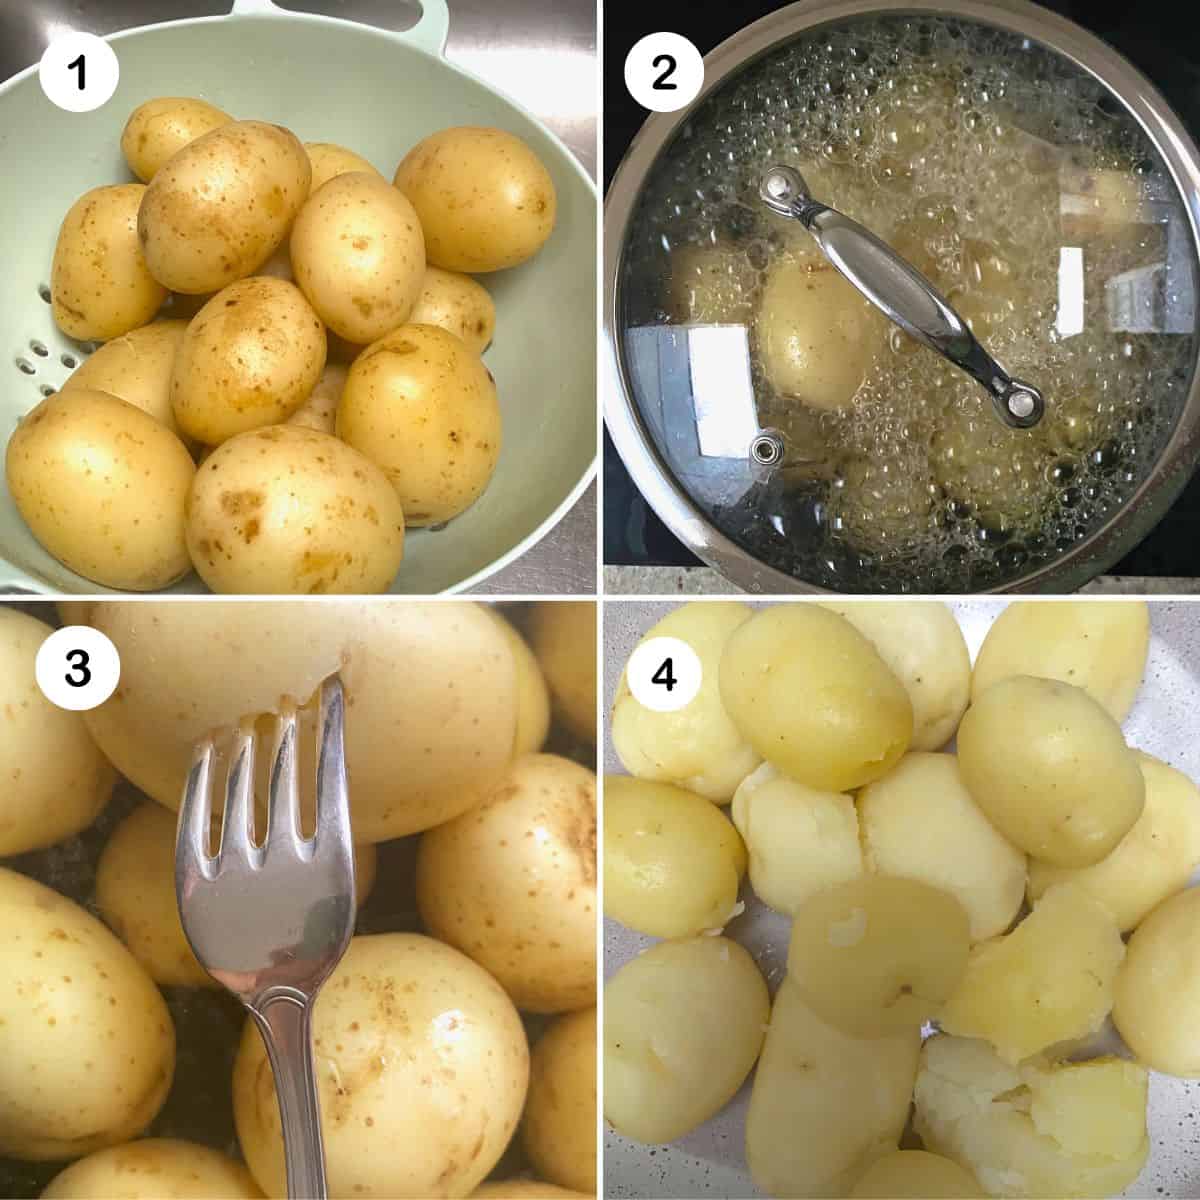 Boiling and peeling the potatoes.